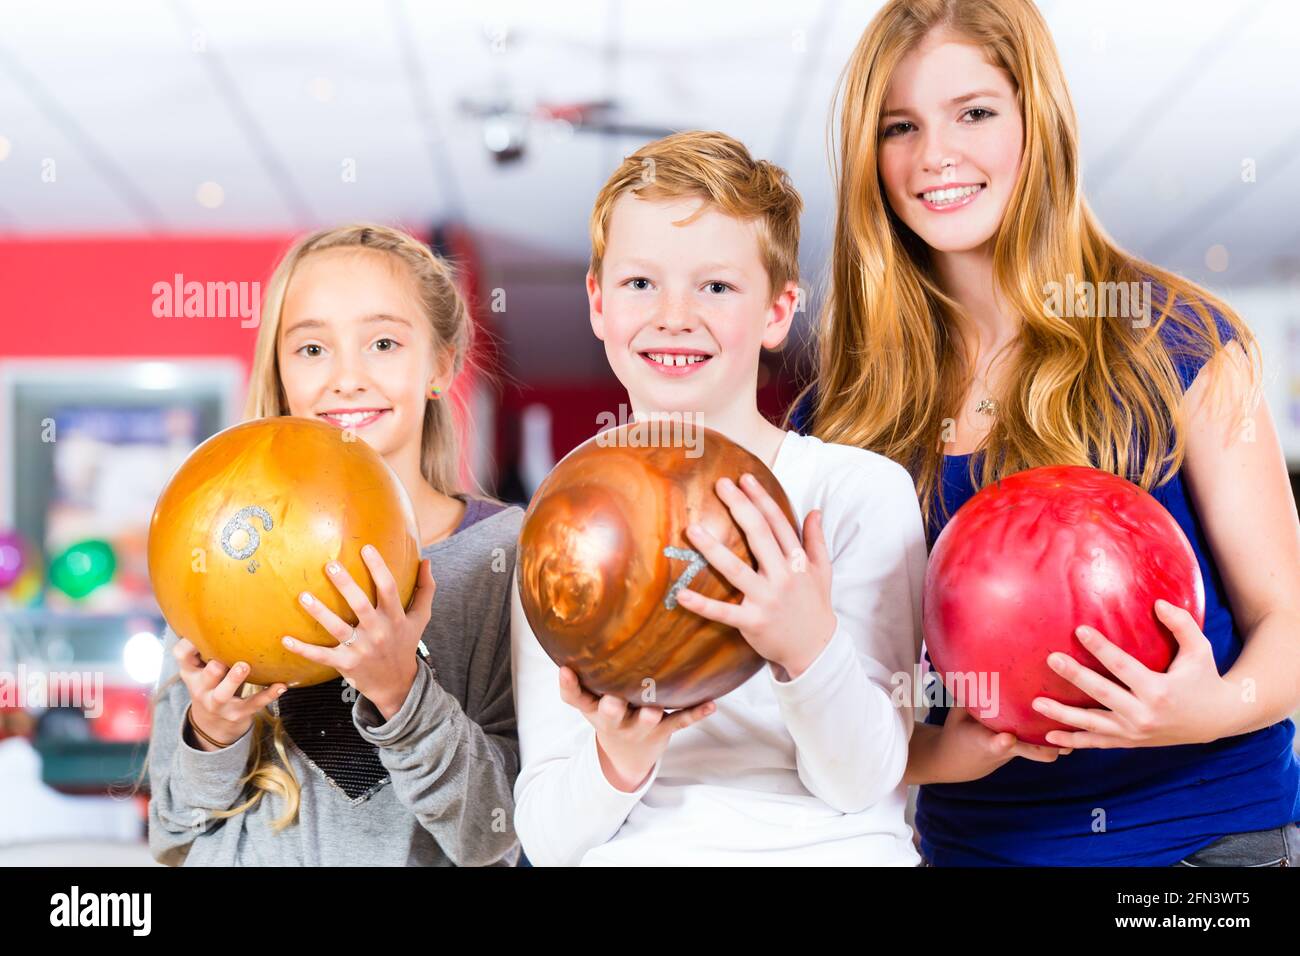 Children Friends playing together at bowling center Stock Photo